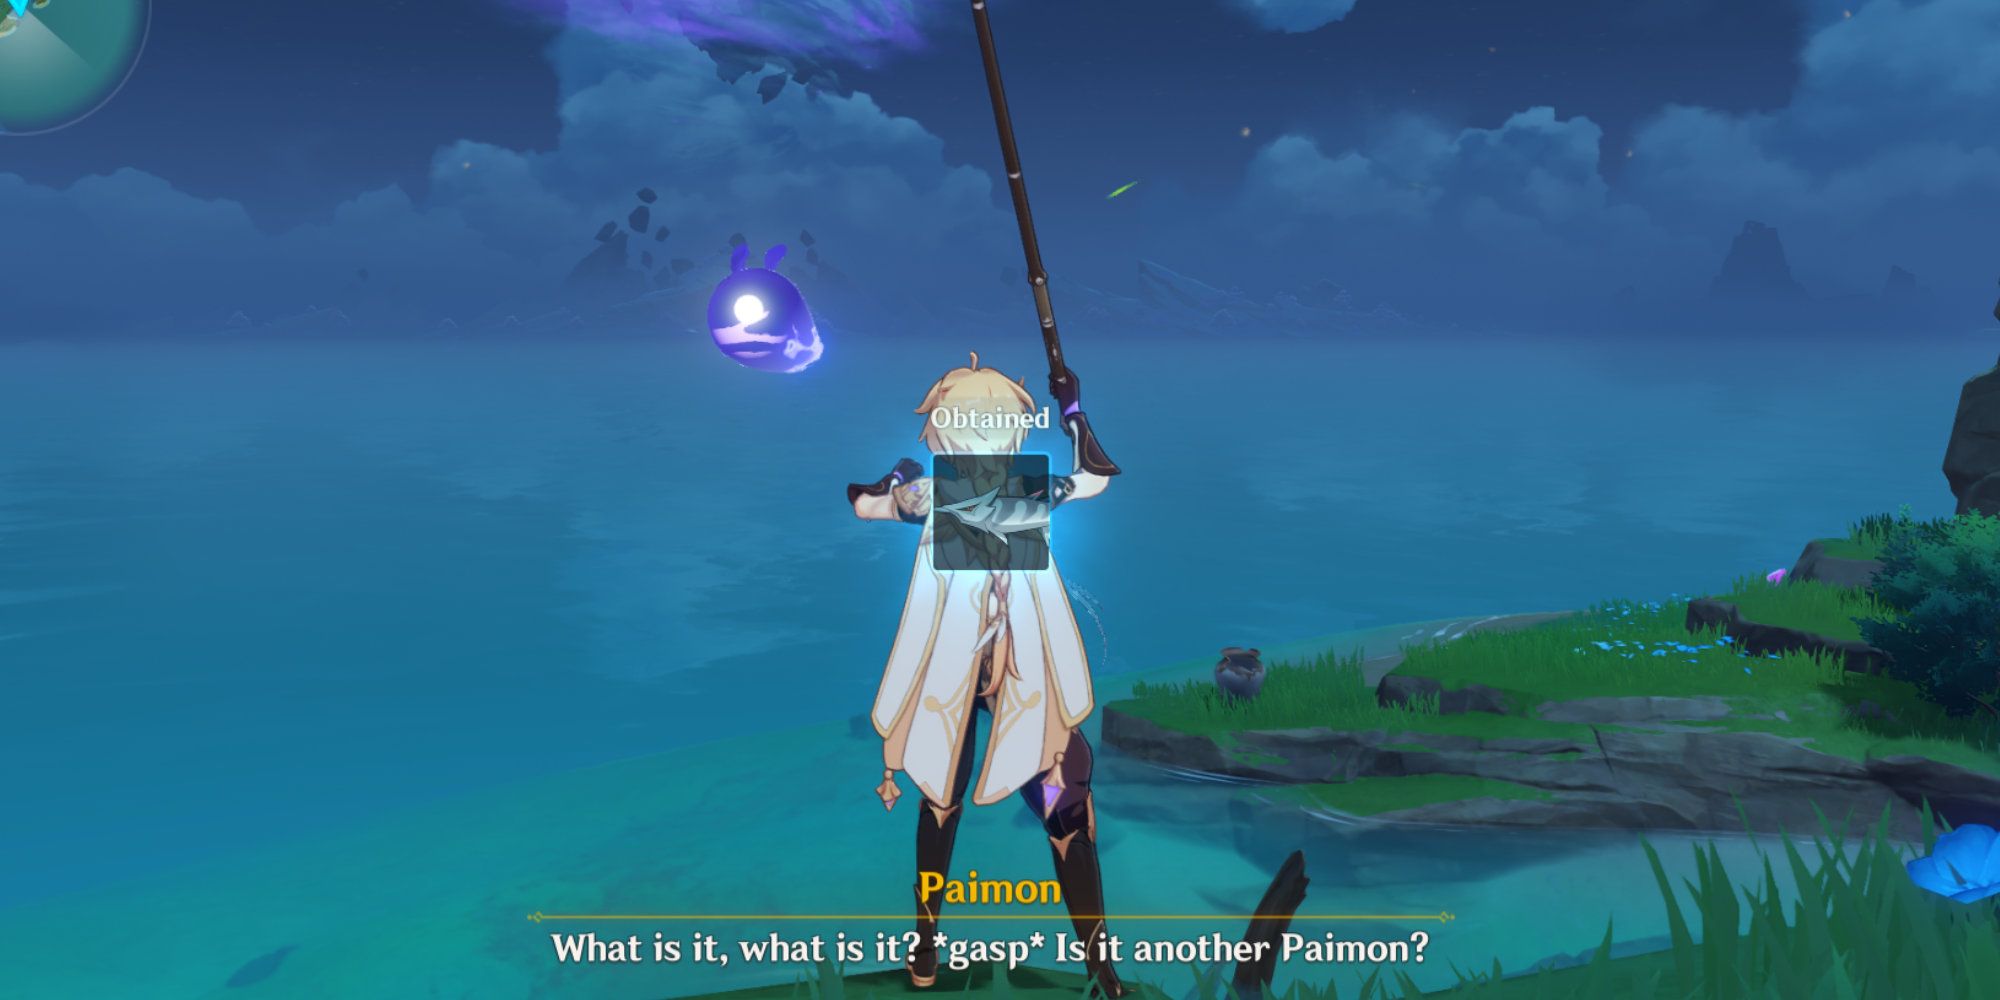 Genshin Impact Paimon asks if we fished another of her